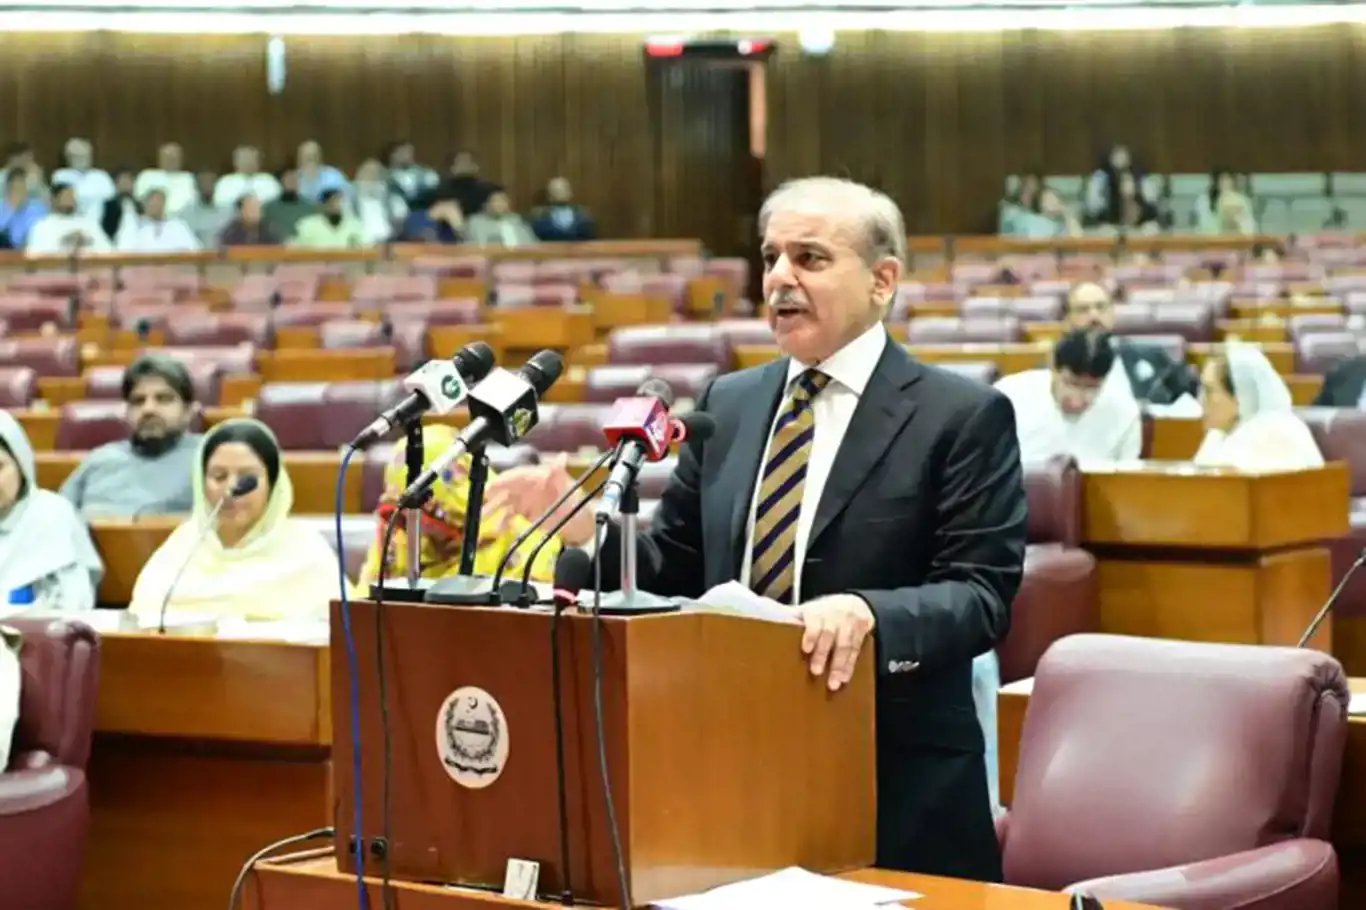 Pakistan's Prime Minister Shehbaz Sharif wins vote of confidence in National Assembly